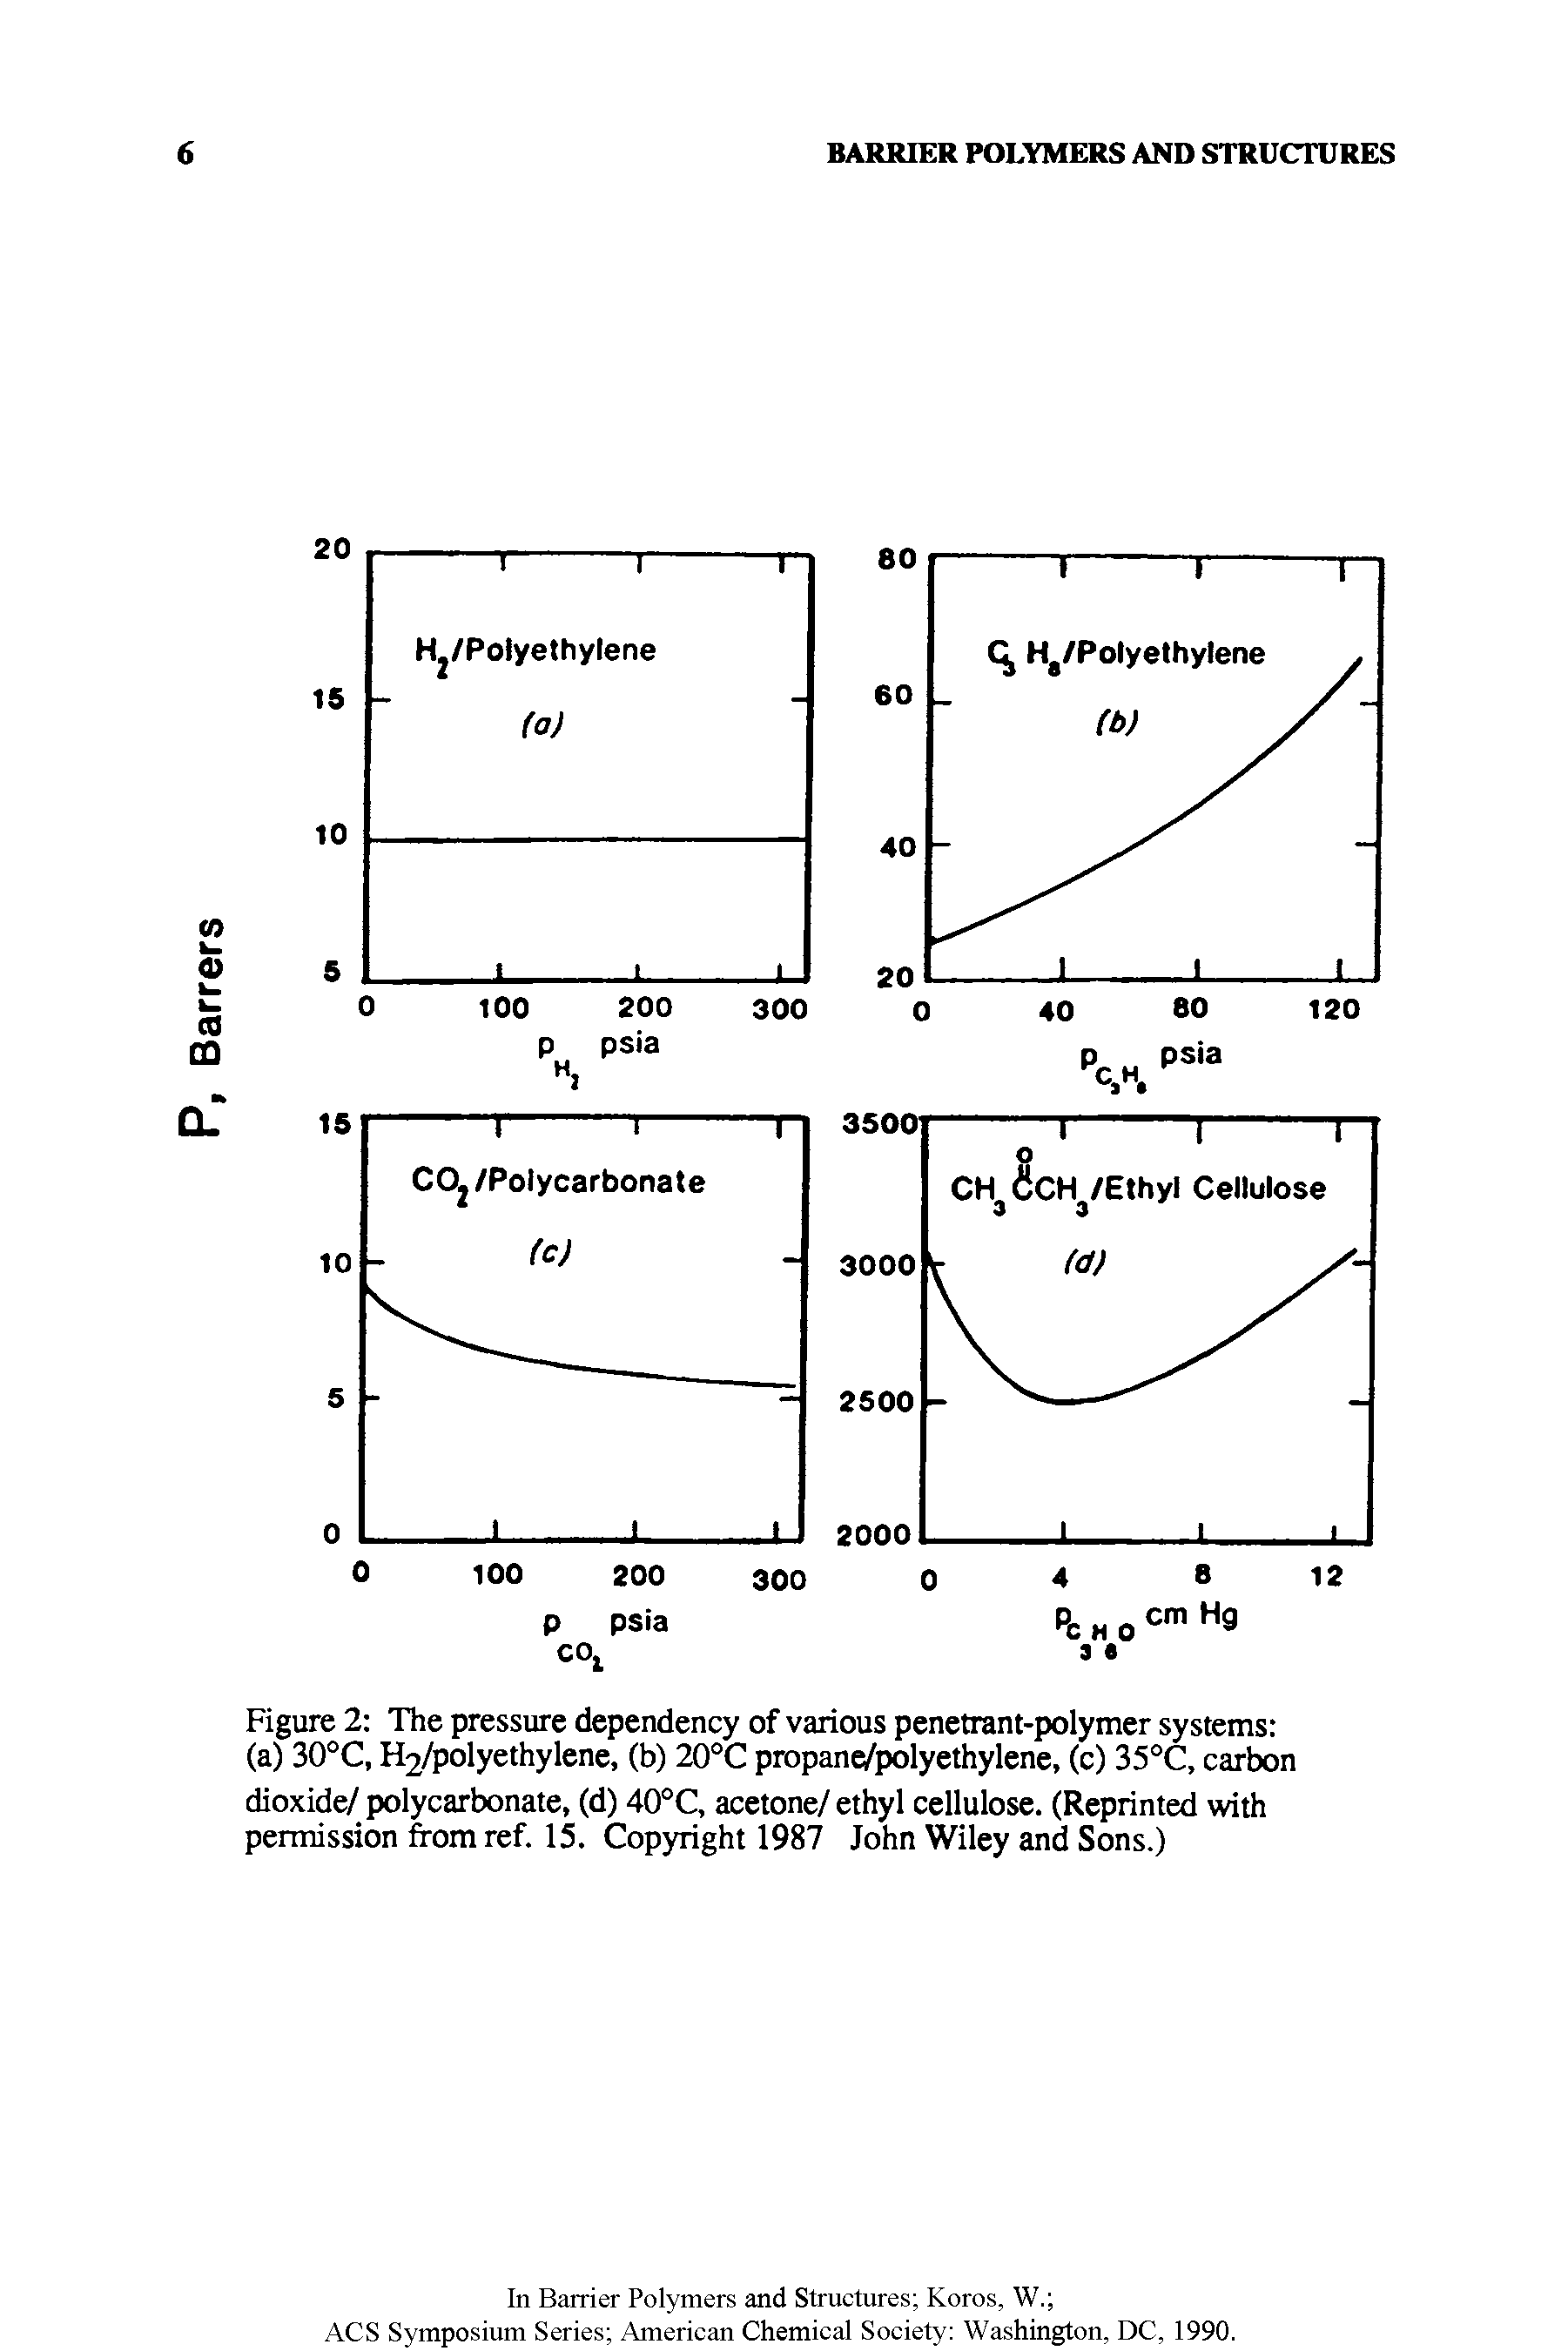 Figure 2 The pressure dependency of various penetrant-polymer systems (a) 30°C, I /polyethylene, (b) 20°C propane/polyethylene, (c) 35°C, carbon dioxide/ polycarbonate, (d) 40°C, acetone/ ethyl cellulose. (Reprinted with permission from ref. 15. Copyright 1987 John Wiley and Sons.)...